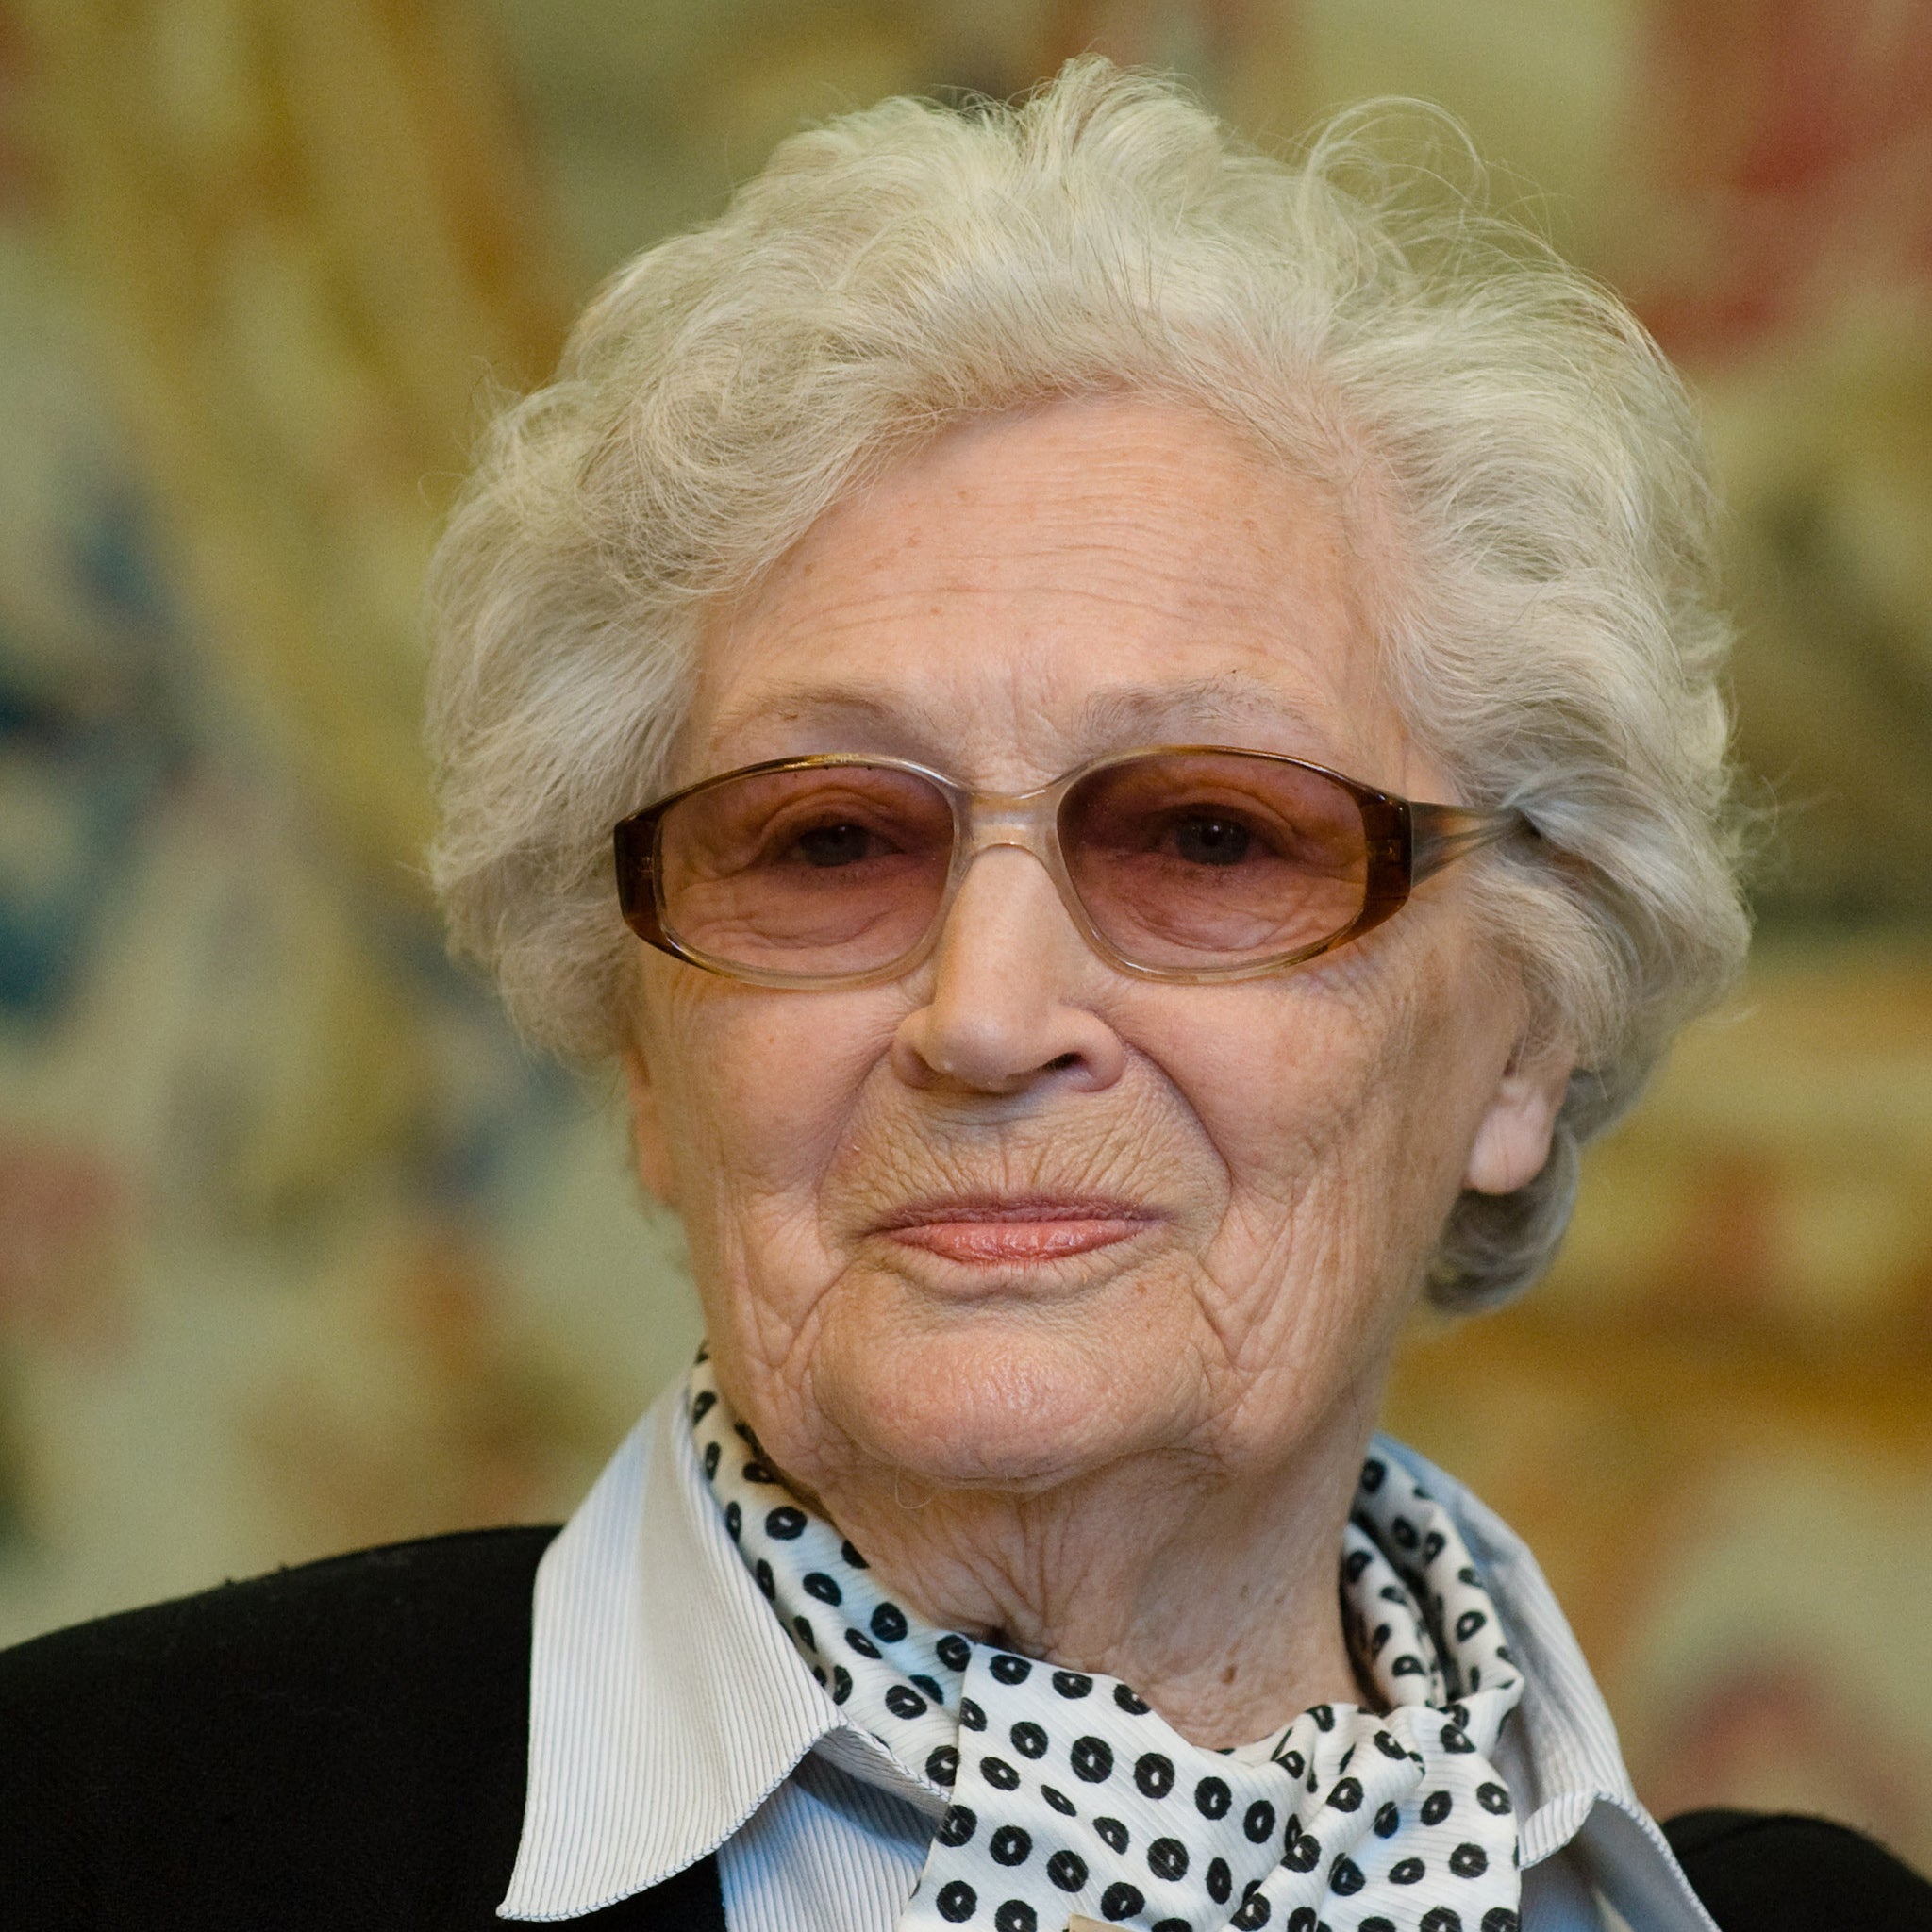 n this March 19, 2012 file photo Jadwiga Pilsudska-Jaraczewska attends a ceremony at the Belweder Palace in Warsaw. Pilsudska-Jaraczewska, a World War II pilot and a daughter of Marshal Jozef Pilsudski, the father of Poland's independence, died on Nov. 16